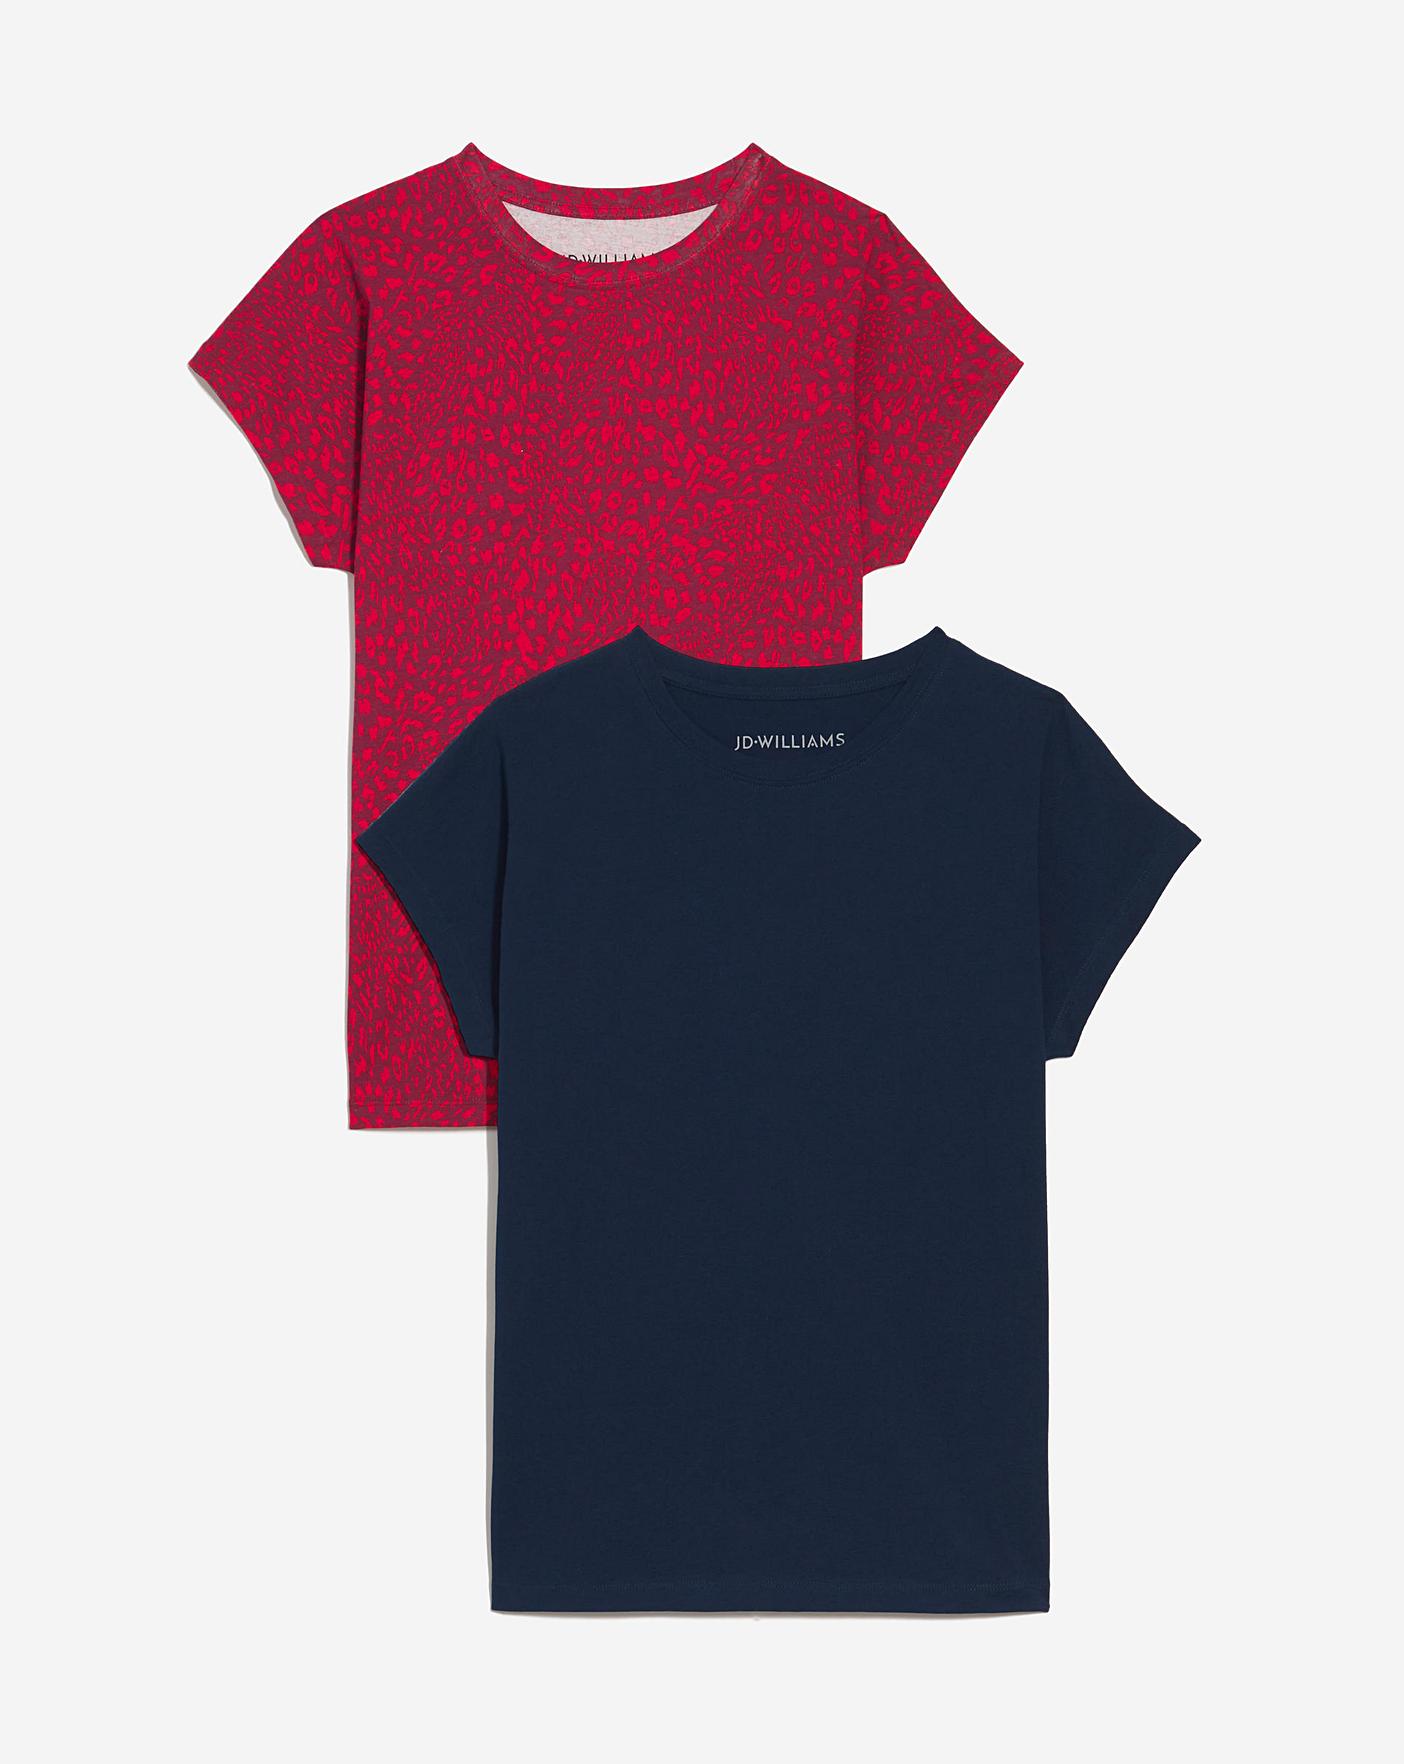 Relaxed T-Shirt Pack | J D Williams